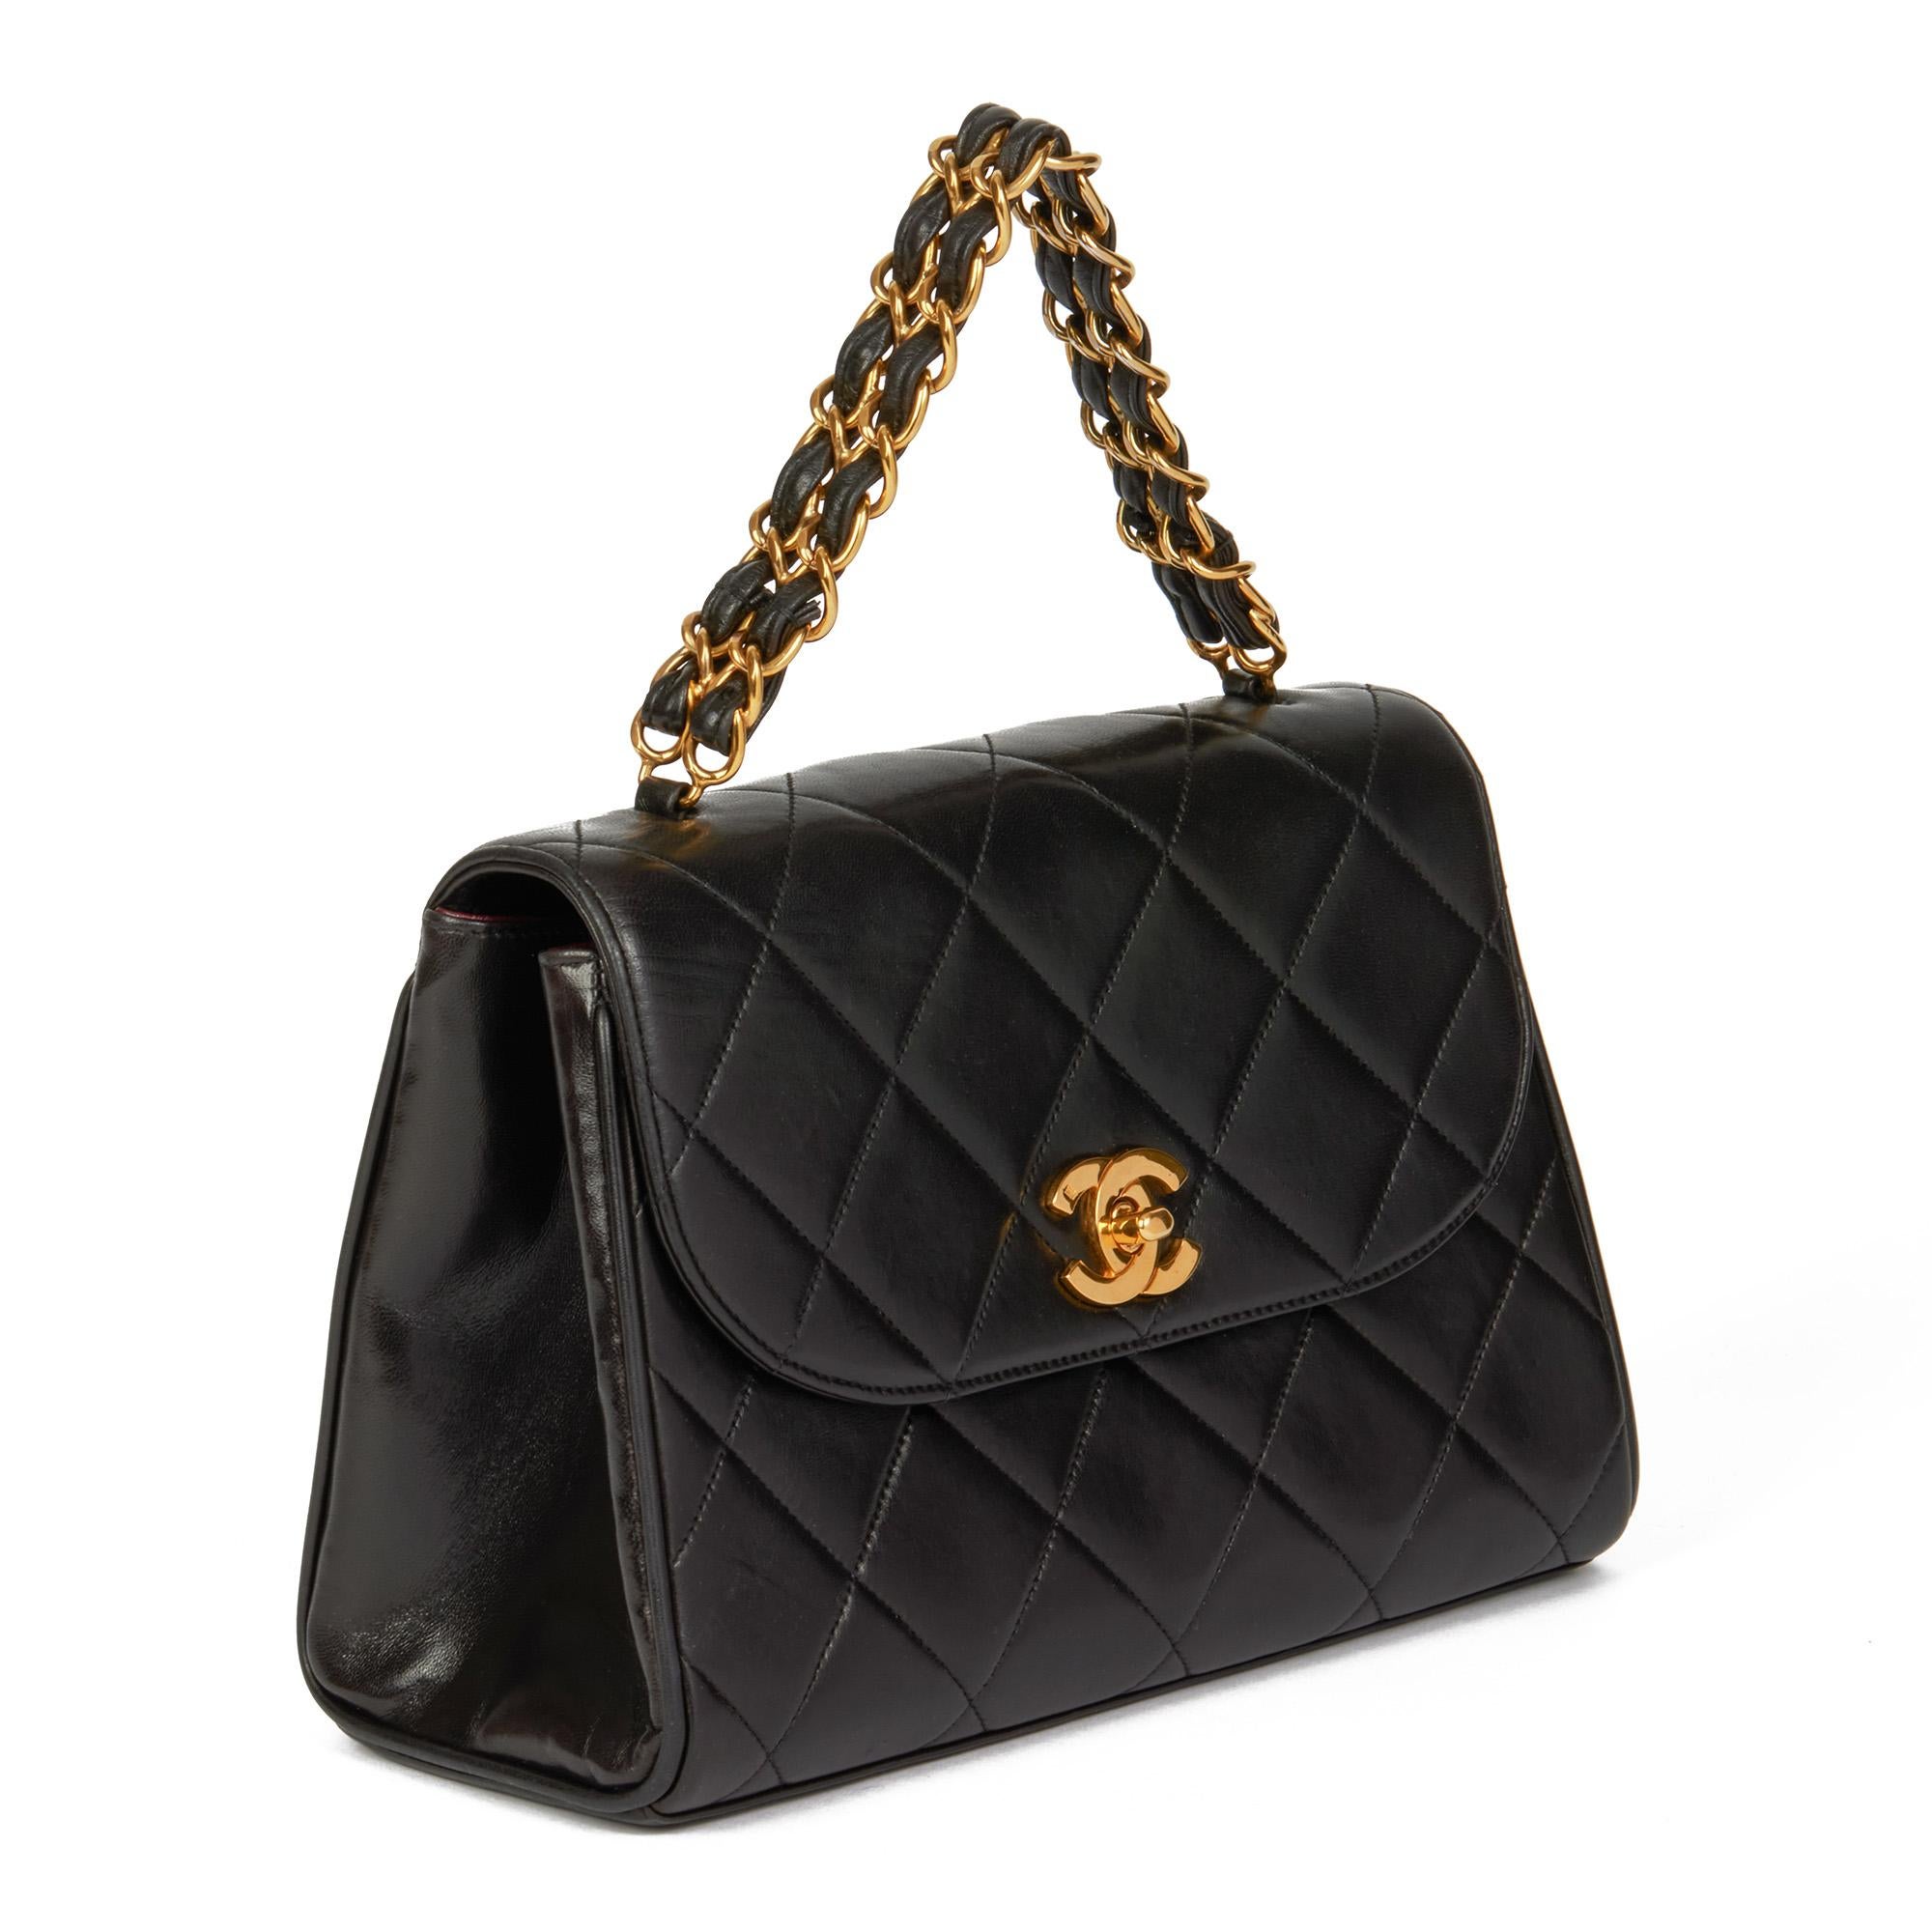 CHANEL
Black Quilted Lambskin Vintage Medium Classic Top Handle

Xupes Reference: HB4332
Serial Number: 3546956
Age (Circa): 1995
Accompanied By: Chanel Dust Bag
Authenticity Details: Serial Sticker (Made in France)
Gender: Ladies
Type: Top